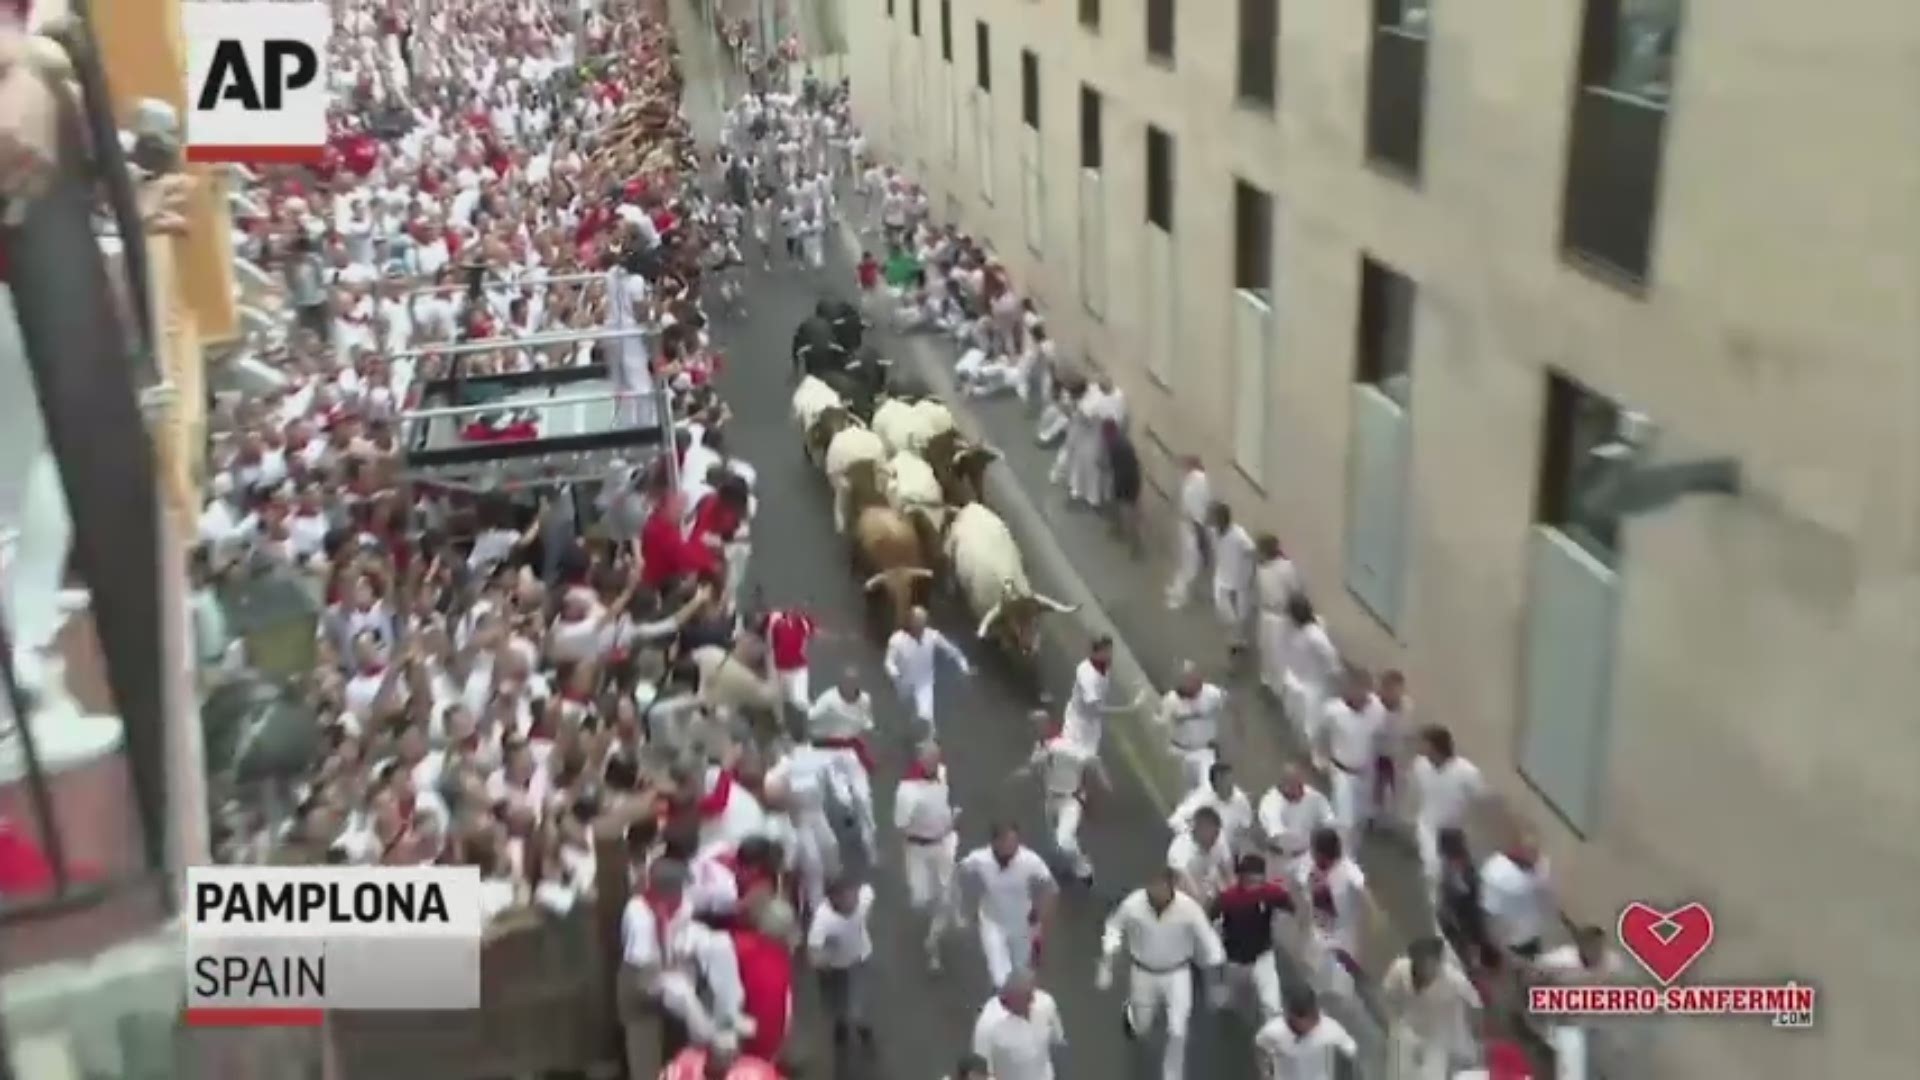 At least five people have been injured in the opening bull run of this year's San Fermin festival in the northern Spanish city of Pamplona on Sunday.